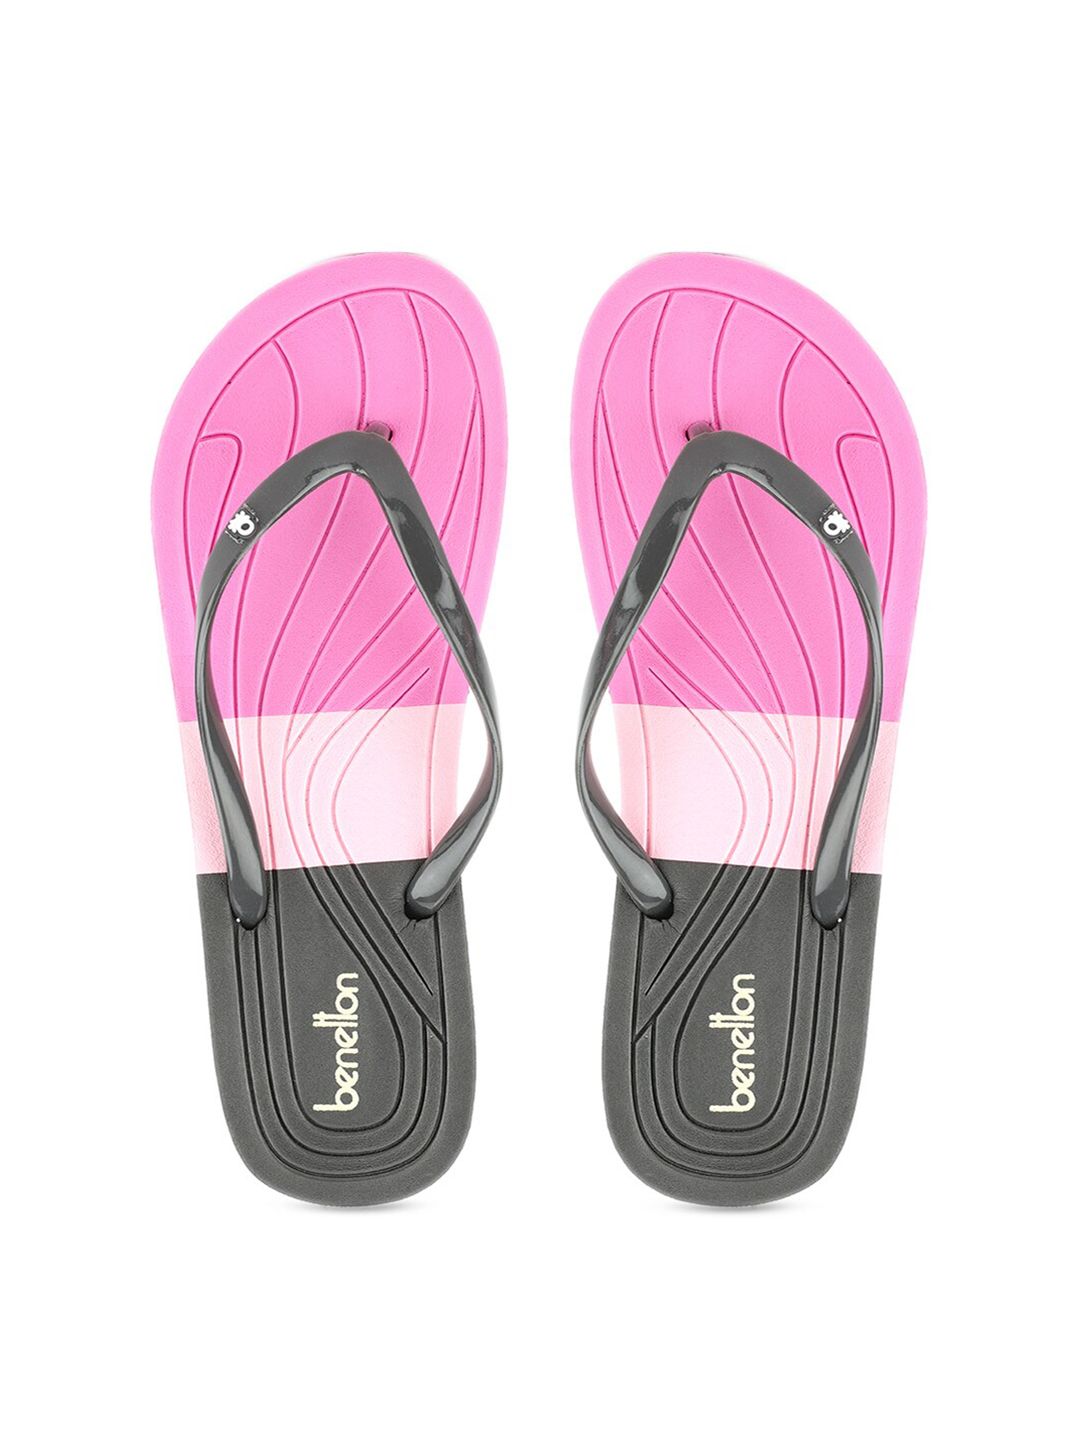 United Colors of Benetton Women Grey & Pink Colourblocked Rubber Thong Flip-Flops Price in India